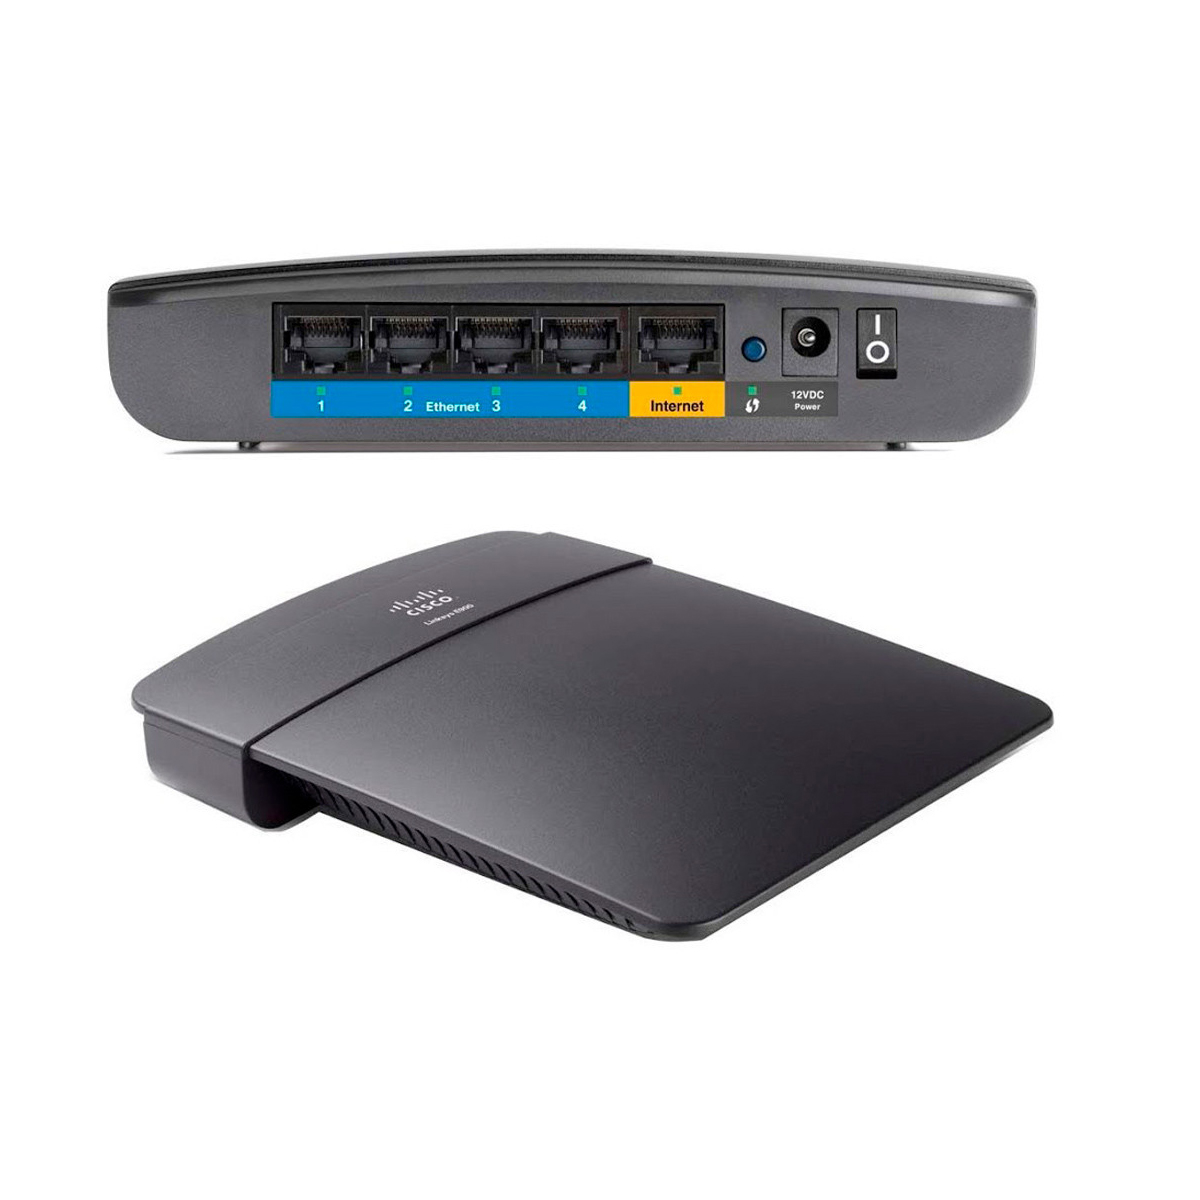 Roteador Linksys E900 N300 Wireless Anatel - Outlet